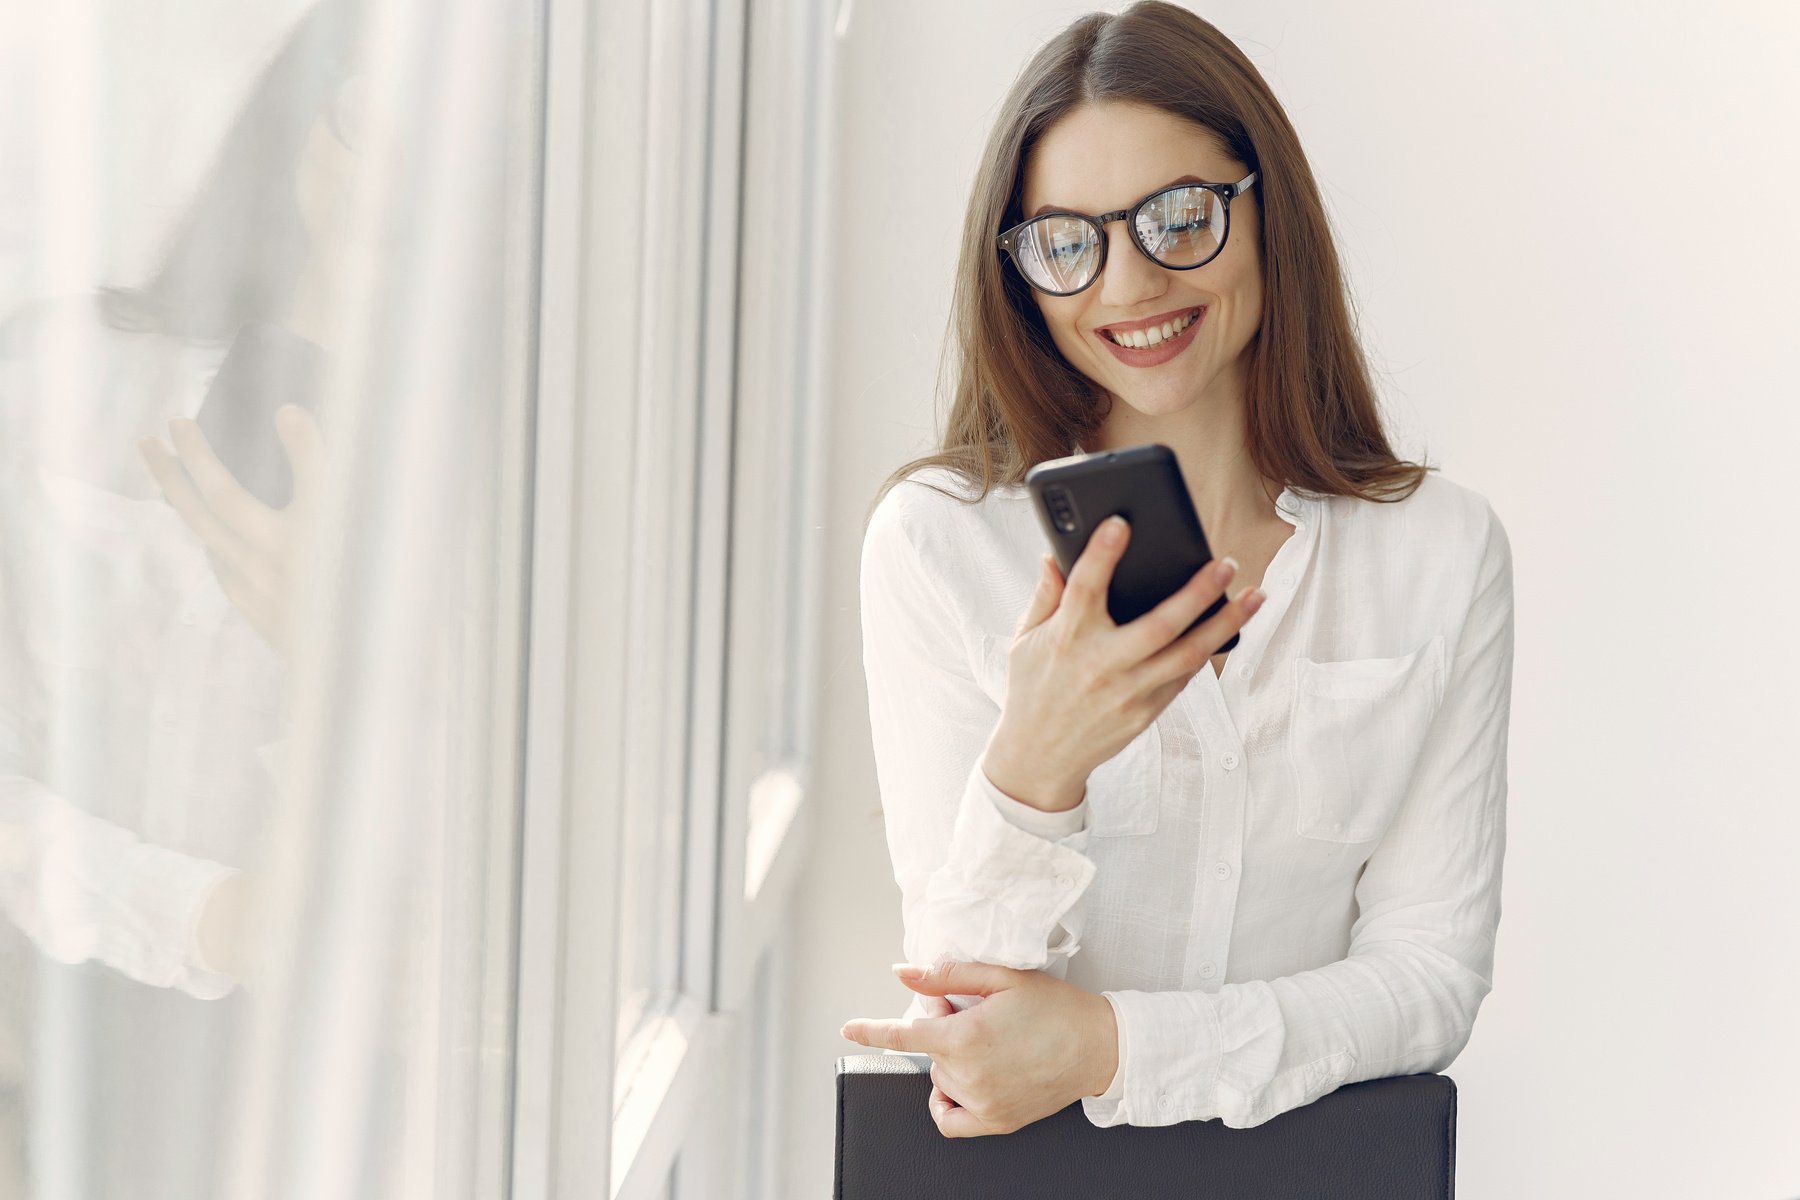 Smiling woman using smartphone in office